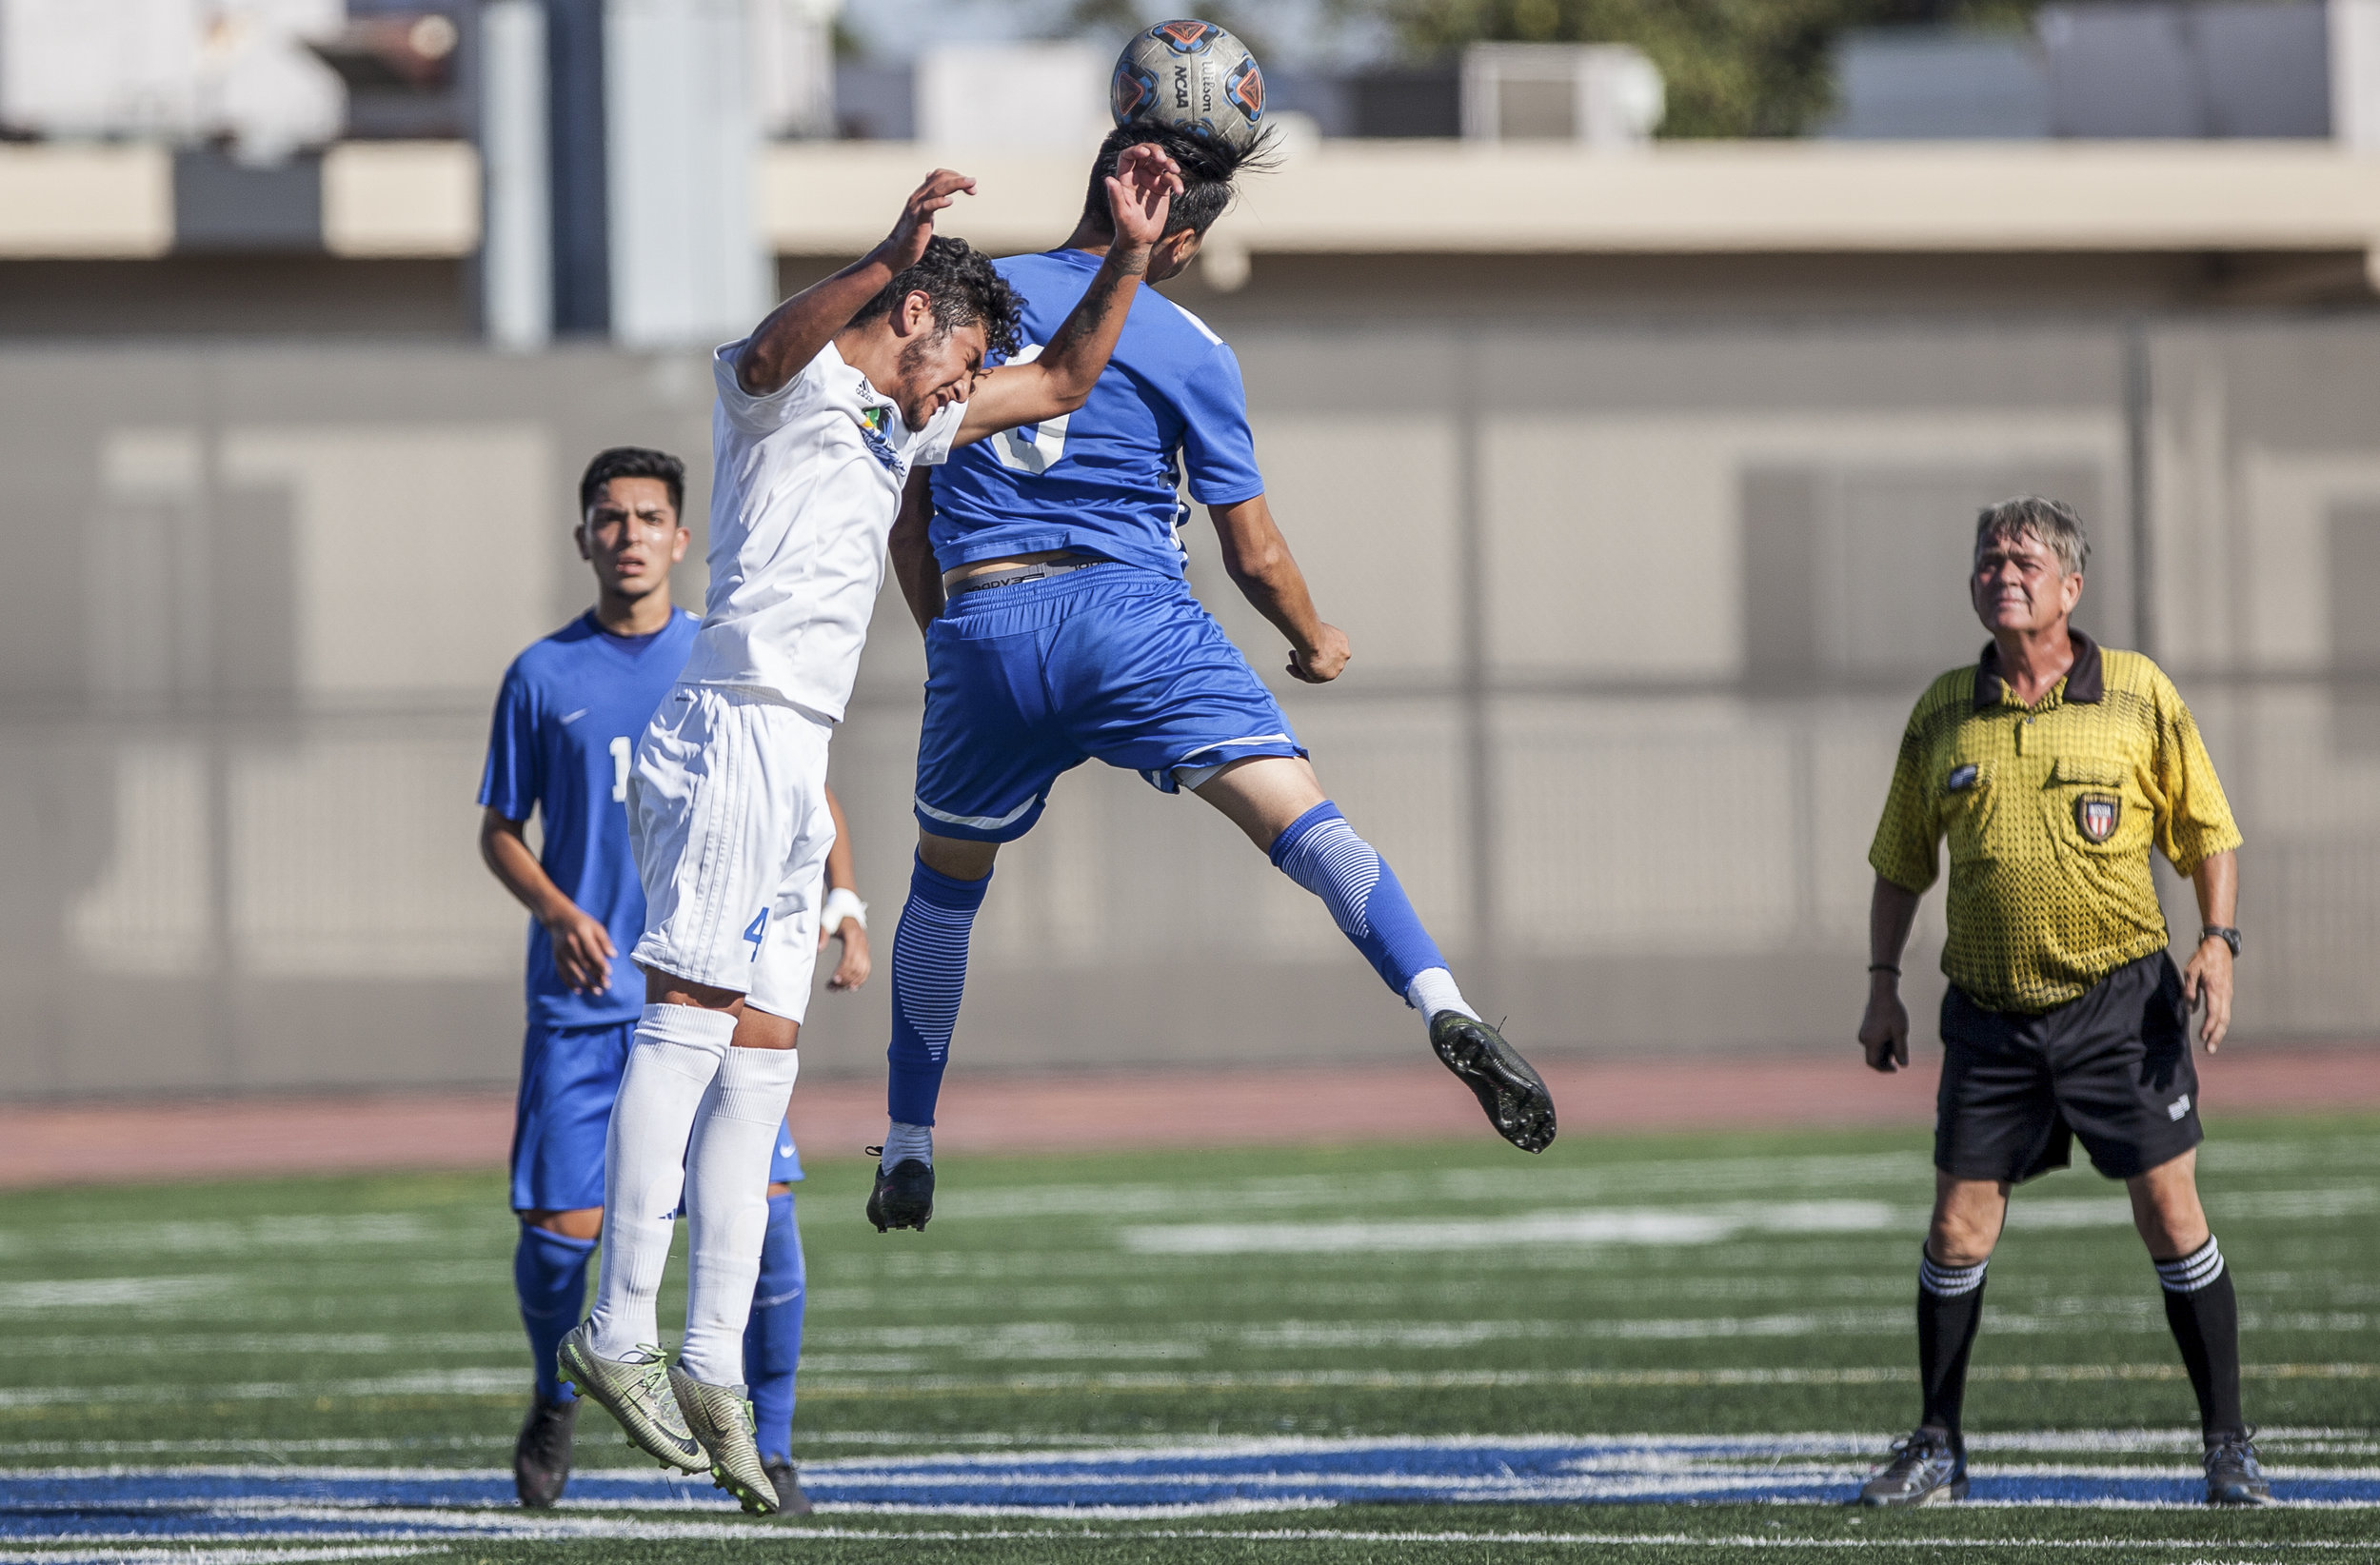  Chris Negrete (9) of the Santa Monica College  jumps up to perform the ball.  The Santa Monica College Corsairs won the game 2-0 against the Oxnard College. The match was held at the Corsair Stadium in Santa Monica, Calif. on October 17, 2017. (Phot